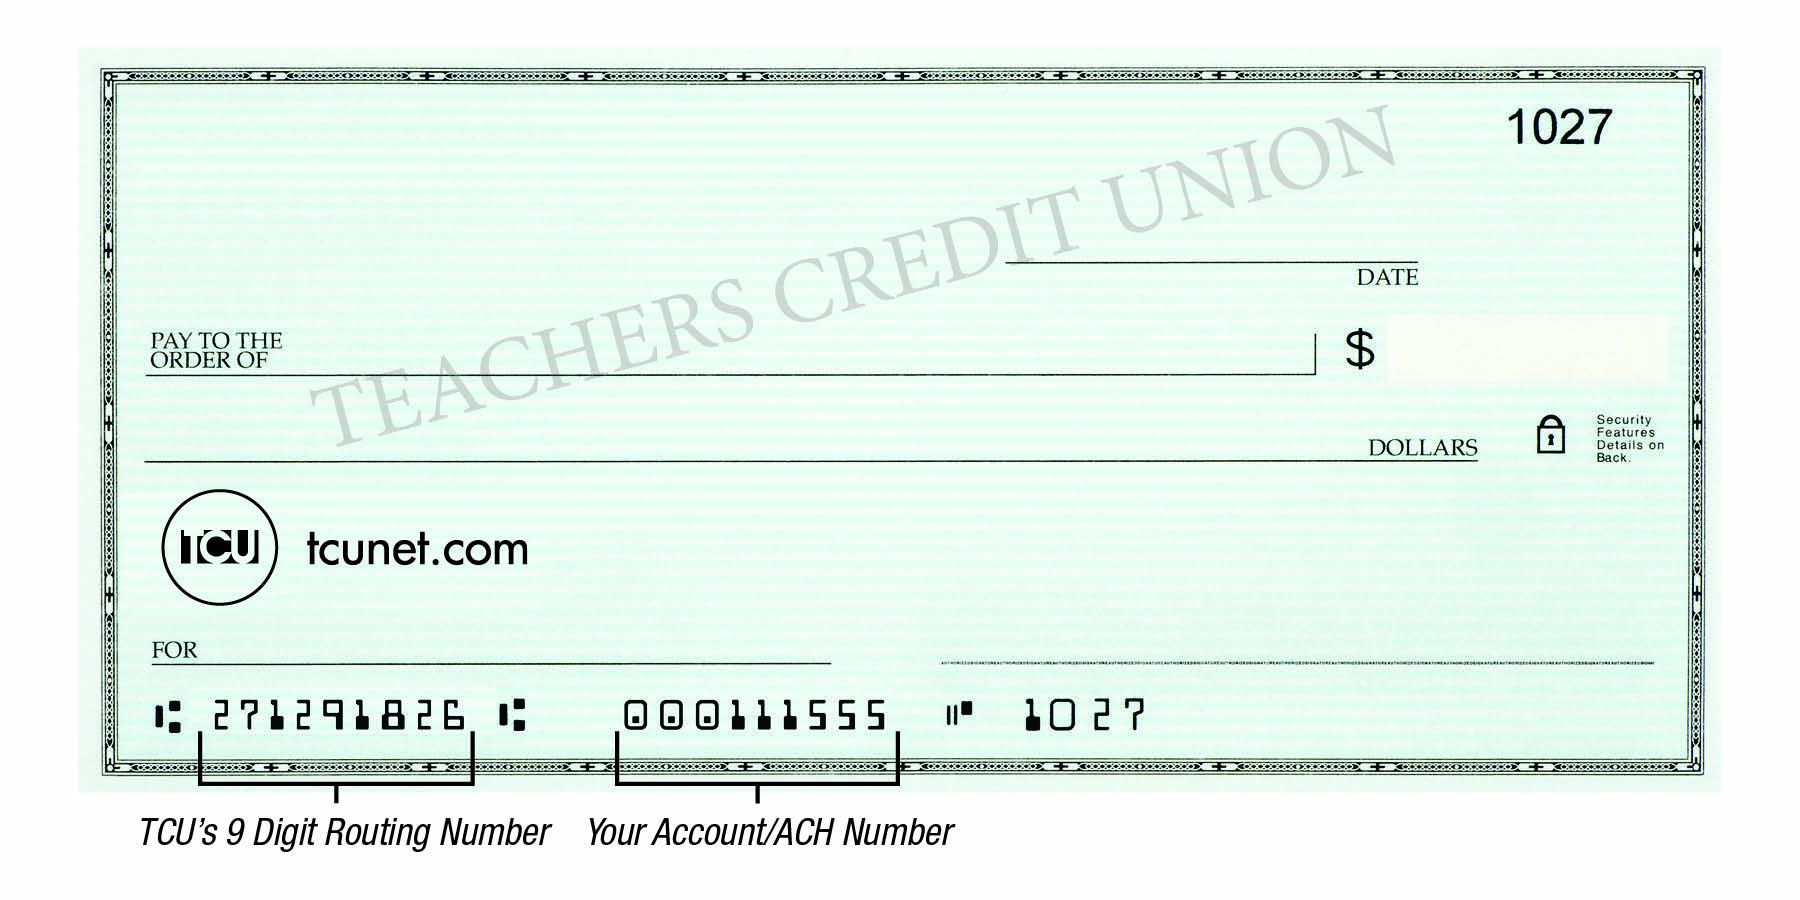 Lower left on check first nine digits are the routing number and the following digits are the account number followed by the check number